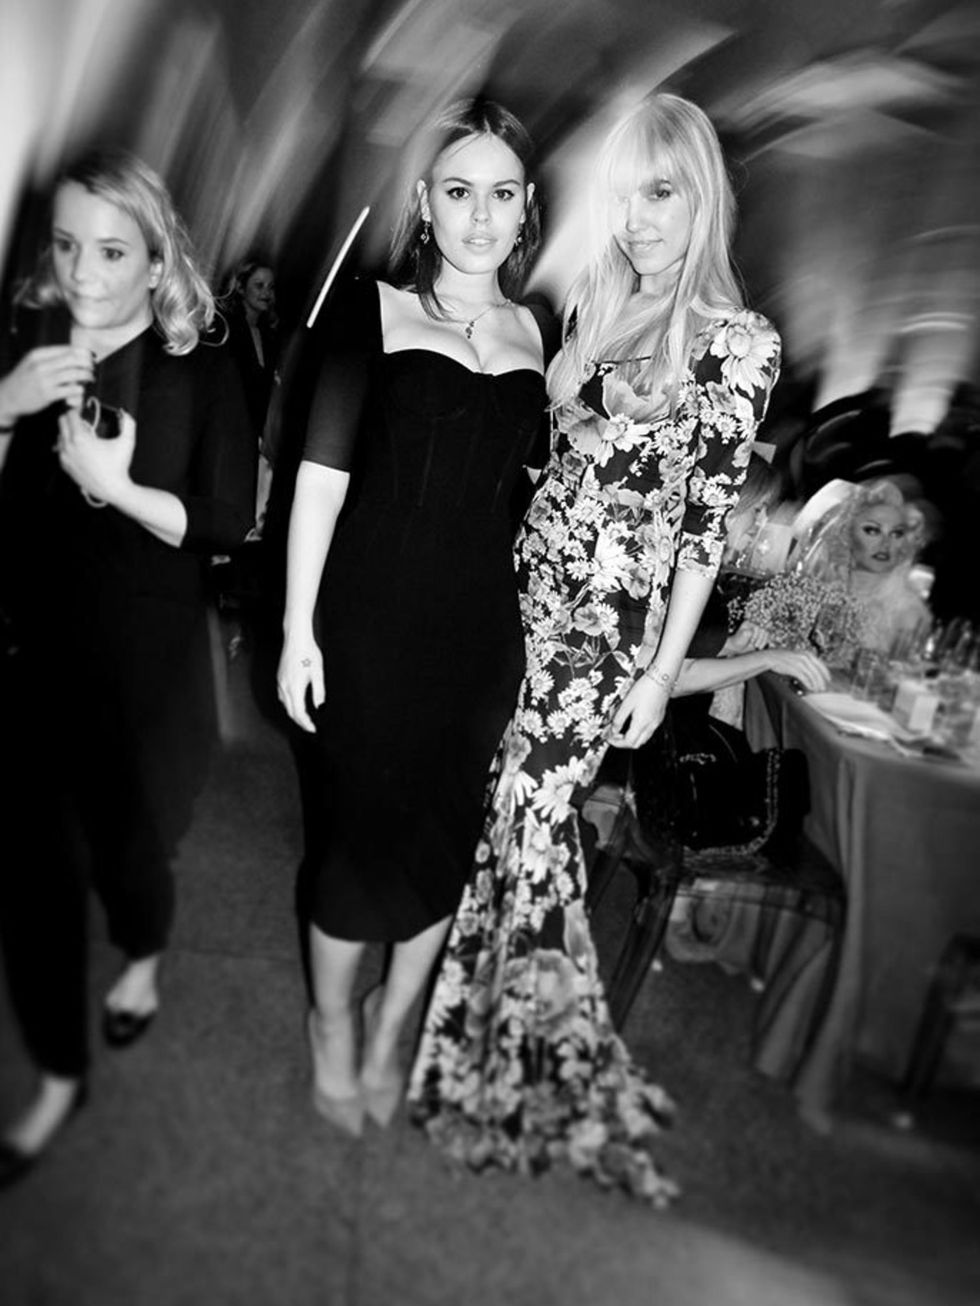 Atlanta De Cadenet and Amber Le Bon at the ELLE Style Awards after party, London, February 2016.